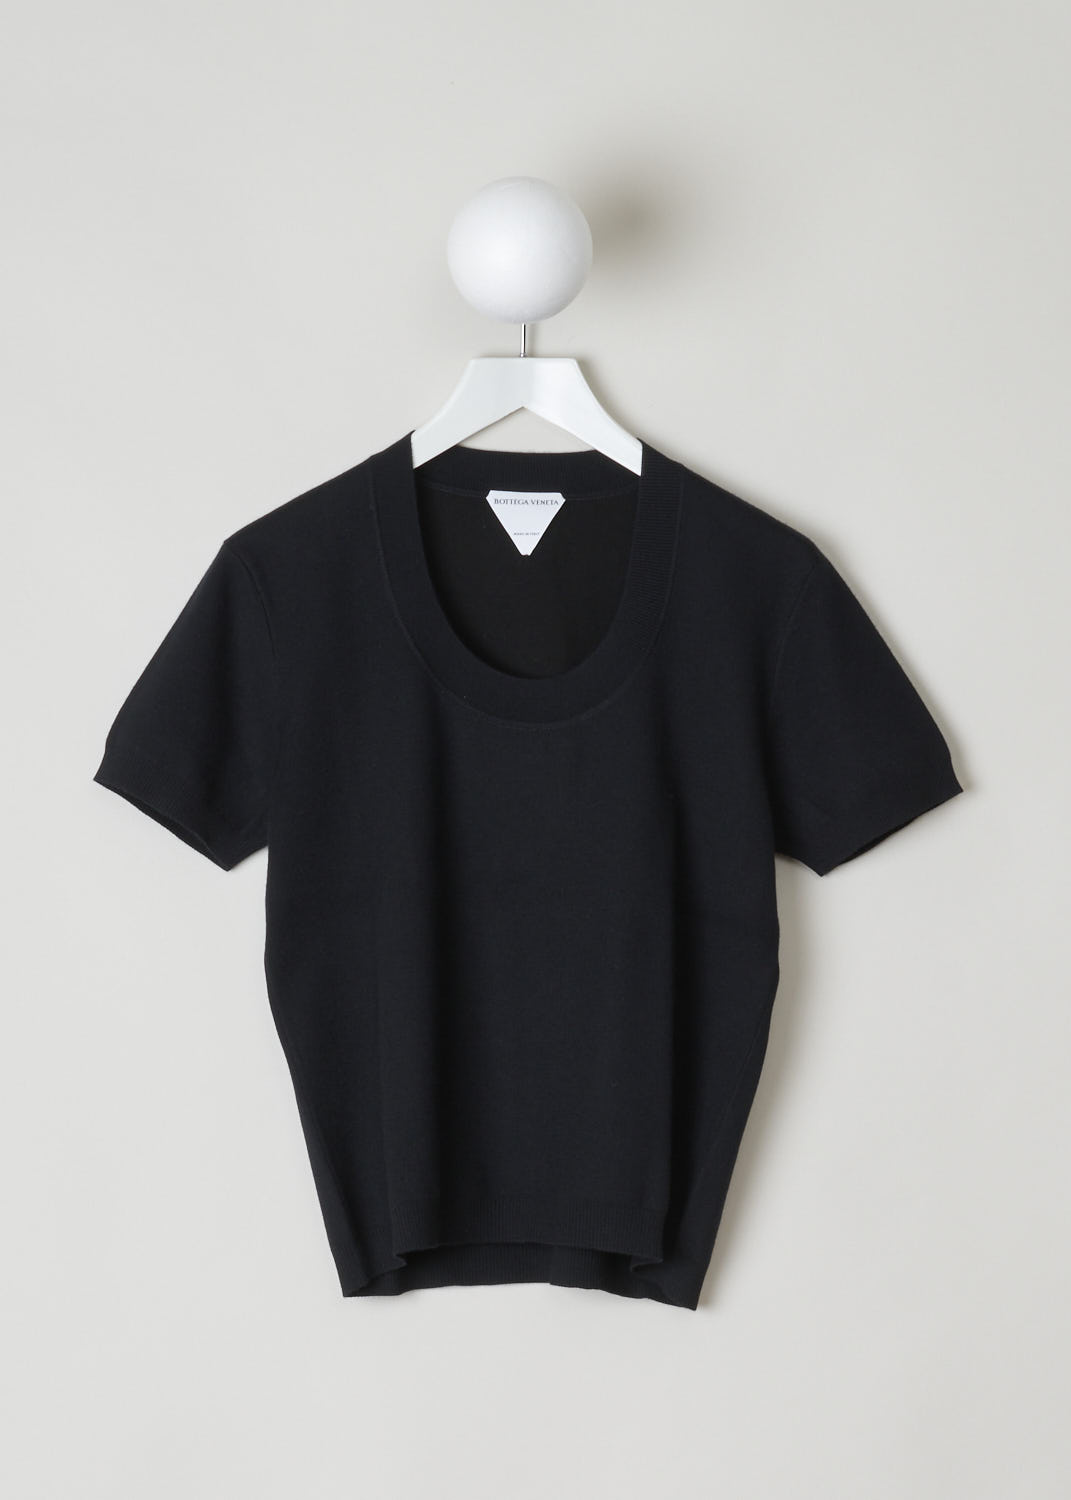 BOTTEGA VENETA, BLACK CASHMERE TOP, 647549_V0A50_1000, Black, Front, Black, short sleeved top. This cashmere top has a rounded collar with a ribbed finish. That same finish can be found along the cuffs and the hem. In the back of the neck, the signature Bottega Veneta triangle can be found. 
